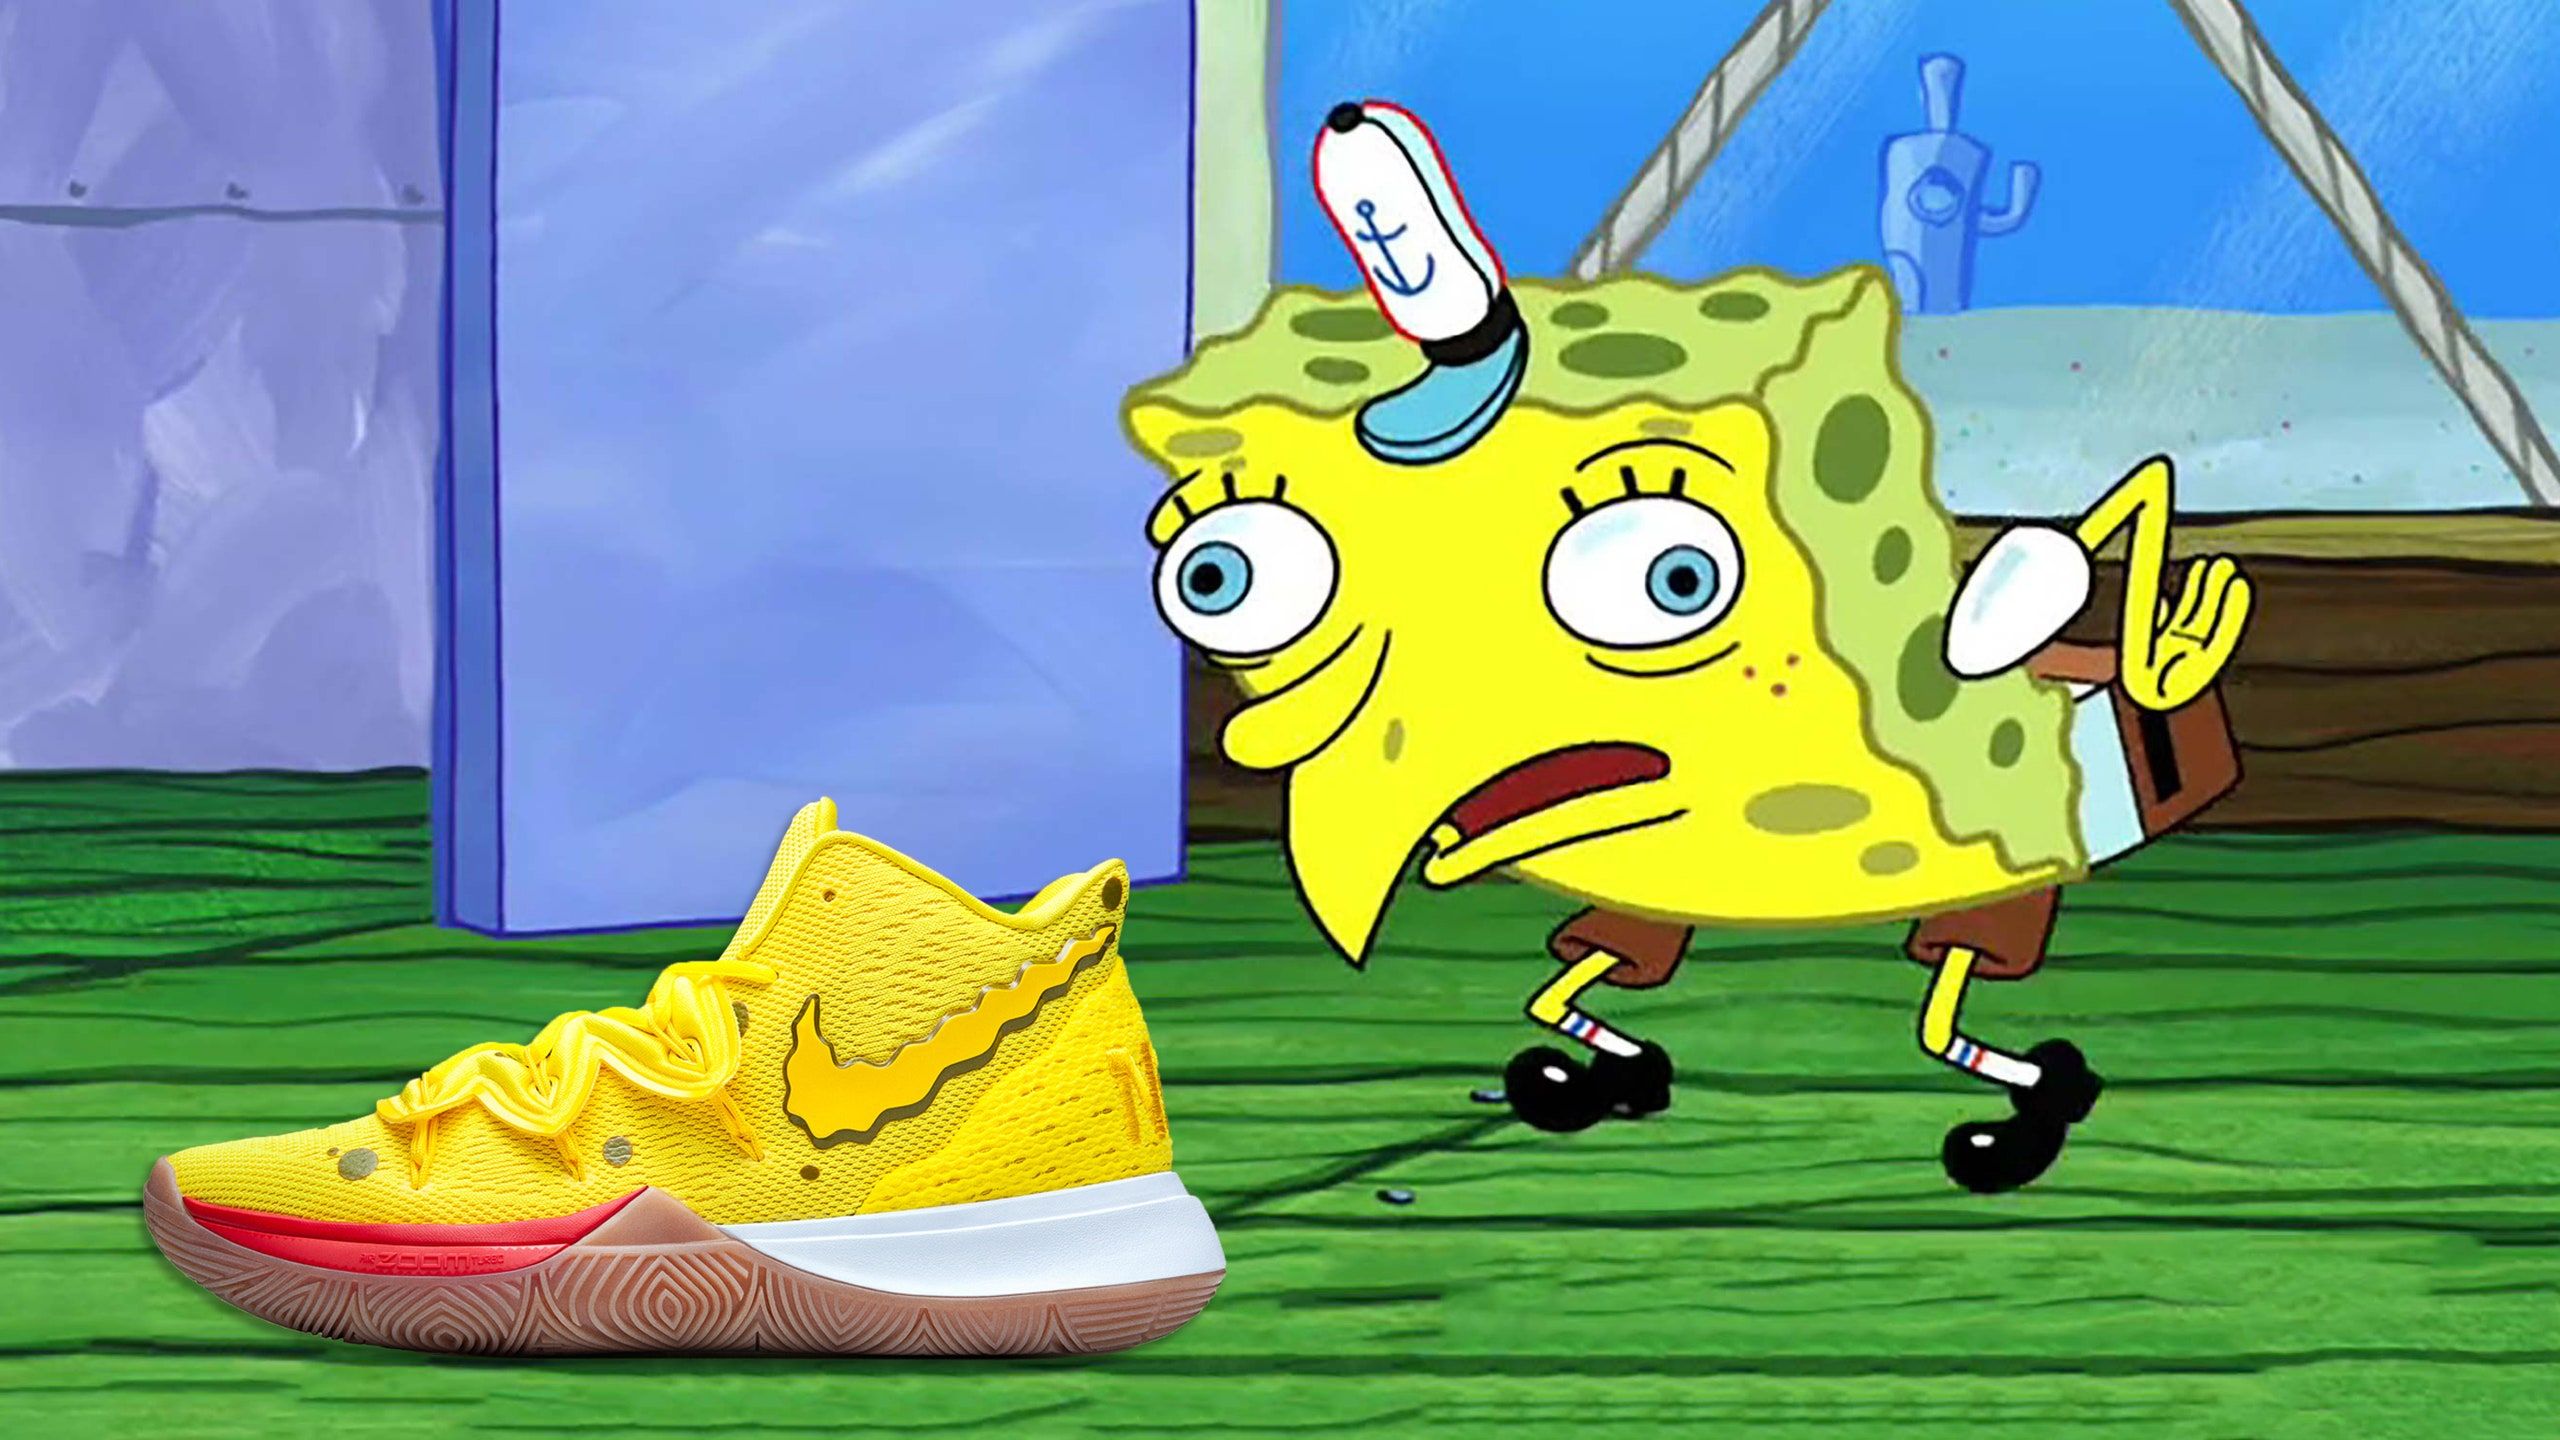 Kyrie Irving on His New Nike x SpongeBob Shoes and the Best Basketball Players in Bikini Bottom